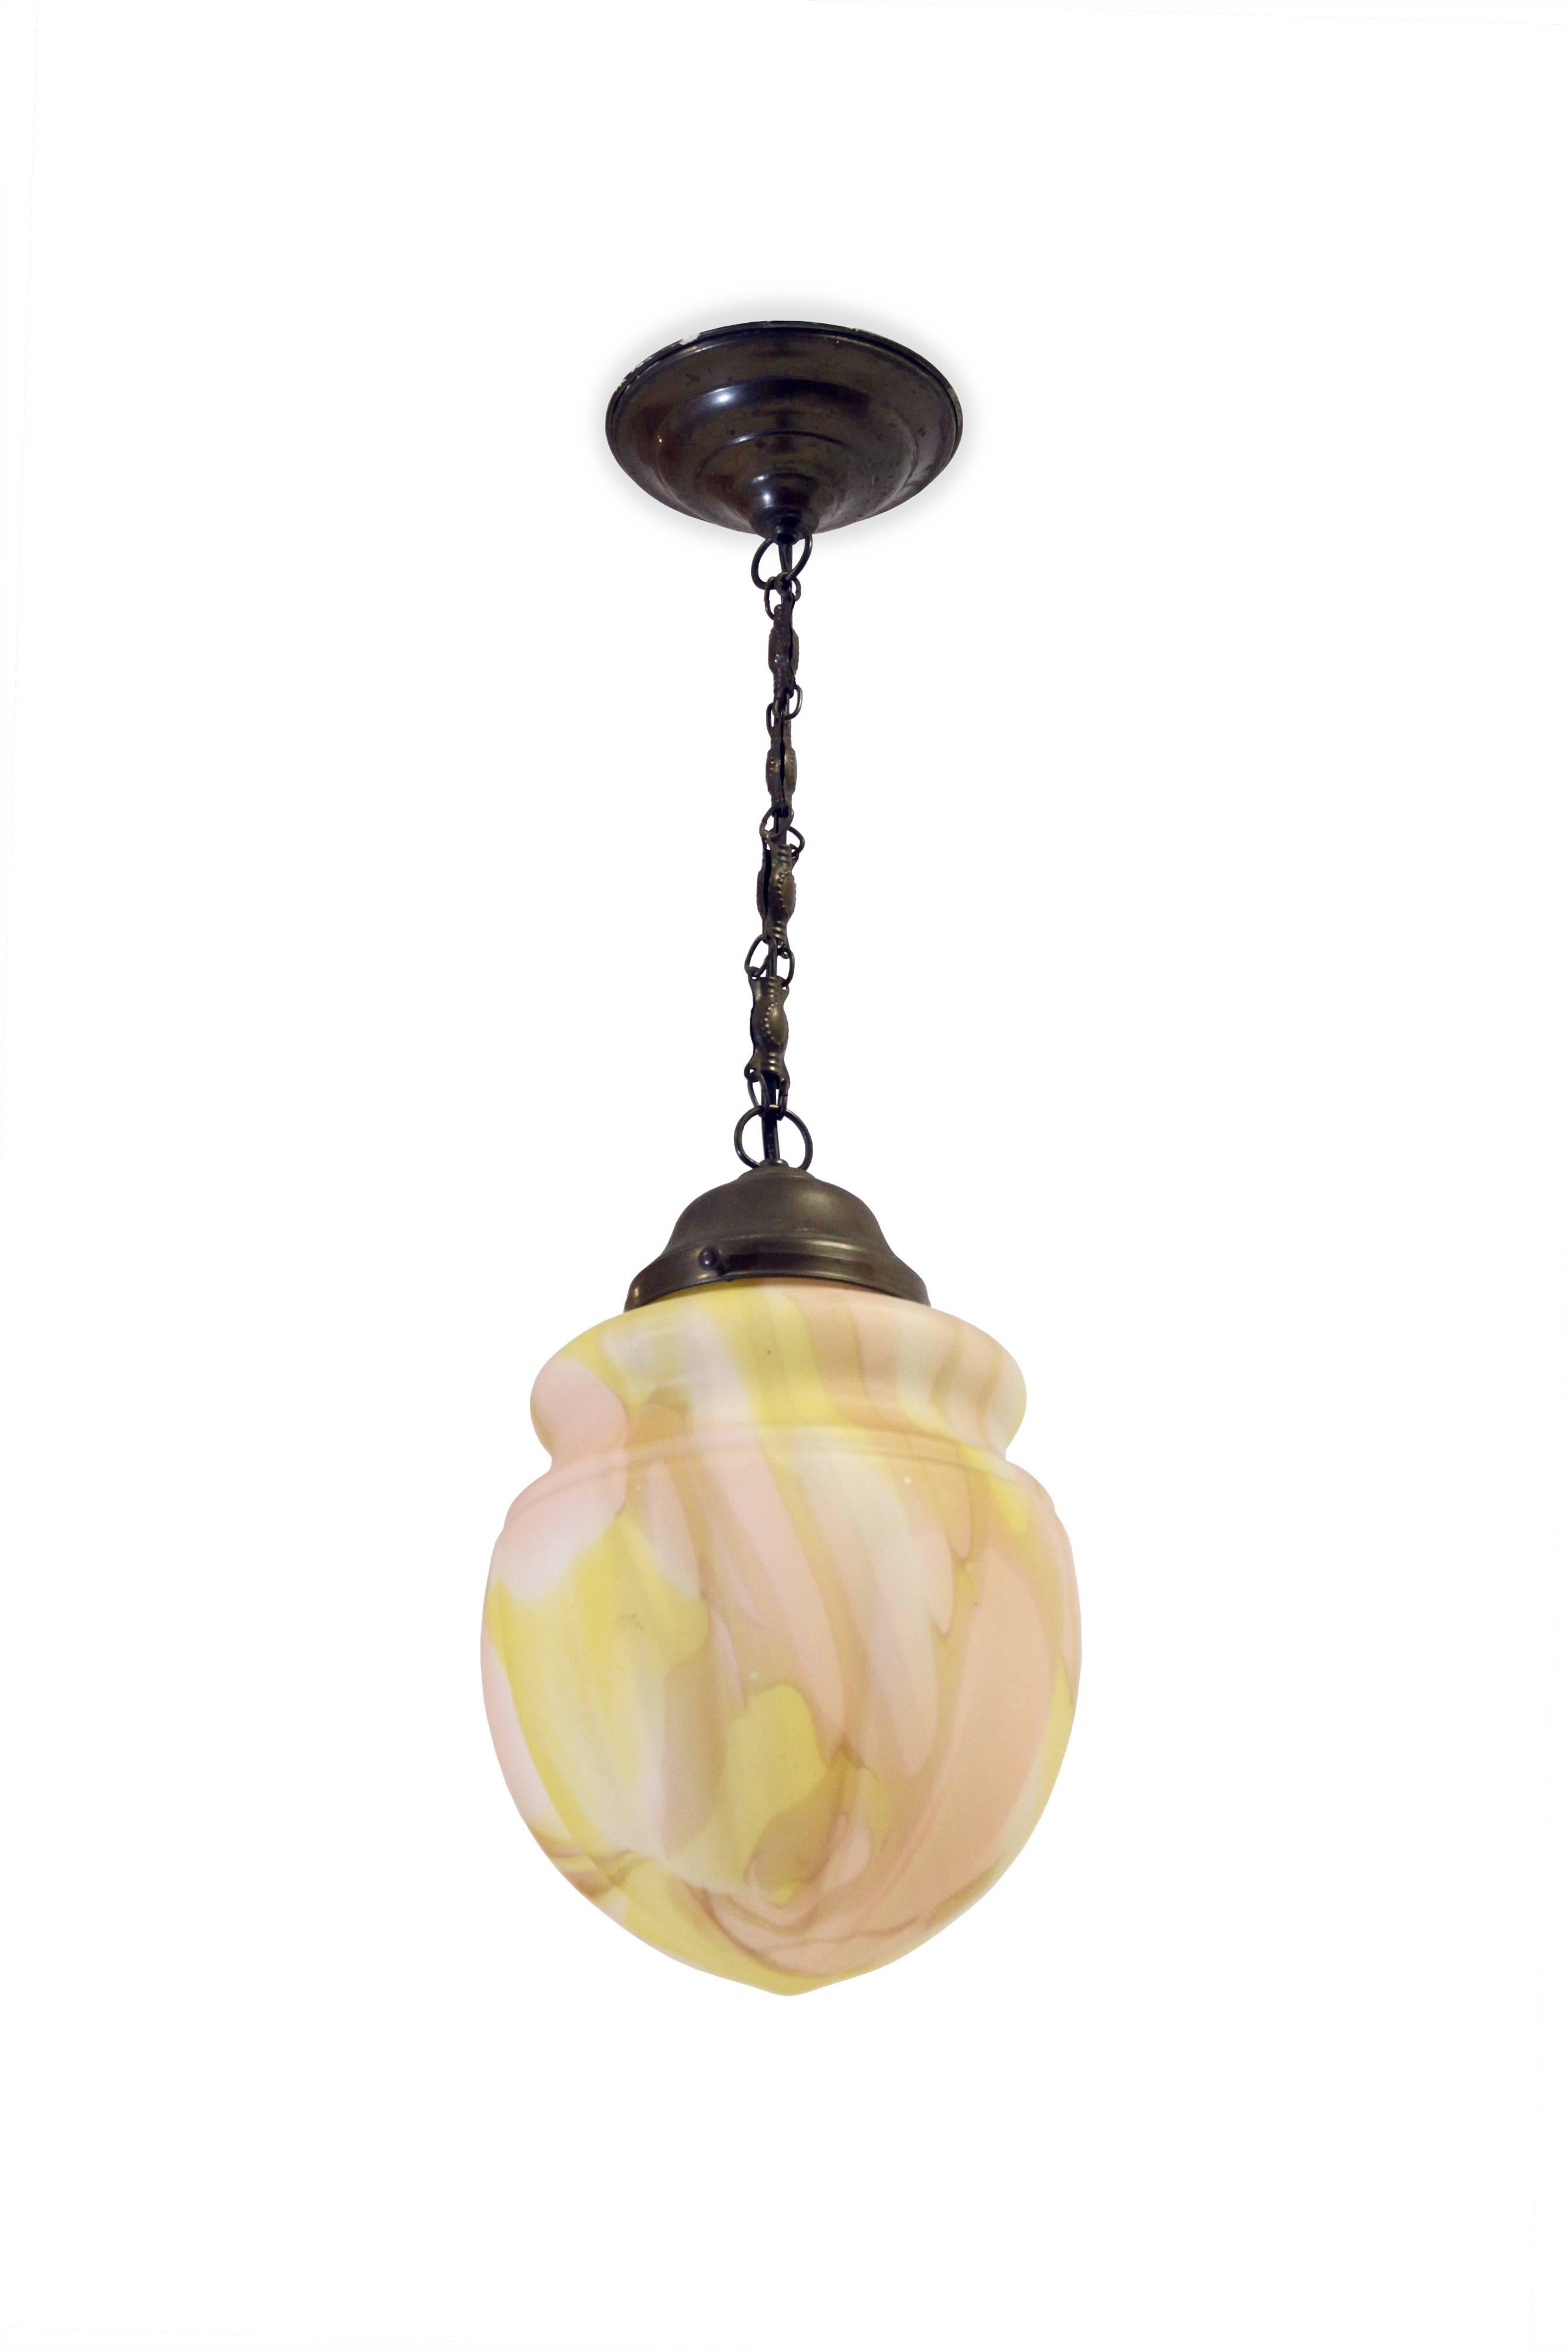 Wonderful and decorative Art Deco ceiling light in handblown glass shade and steel. Most likely designed and made in Norway by Høvik Verk from circa 1930s first half. The lamp is fully working and very good vintage condition.